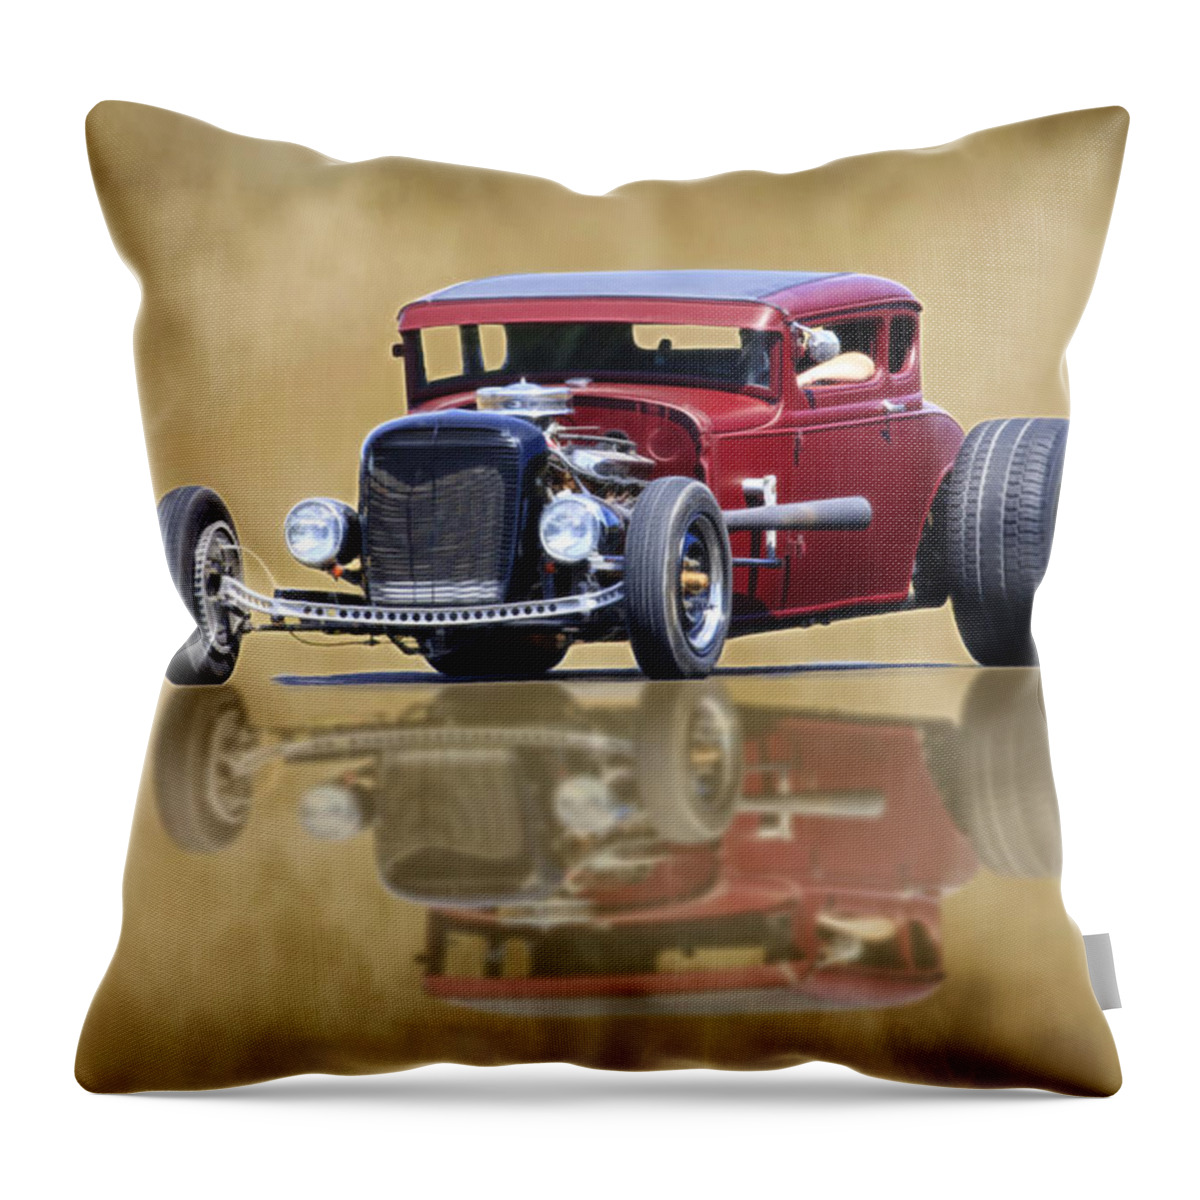 1930 Ford Throw Pillow featuring the photograph Vintage Reflection by Steve McKinzie